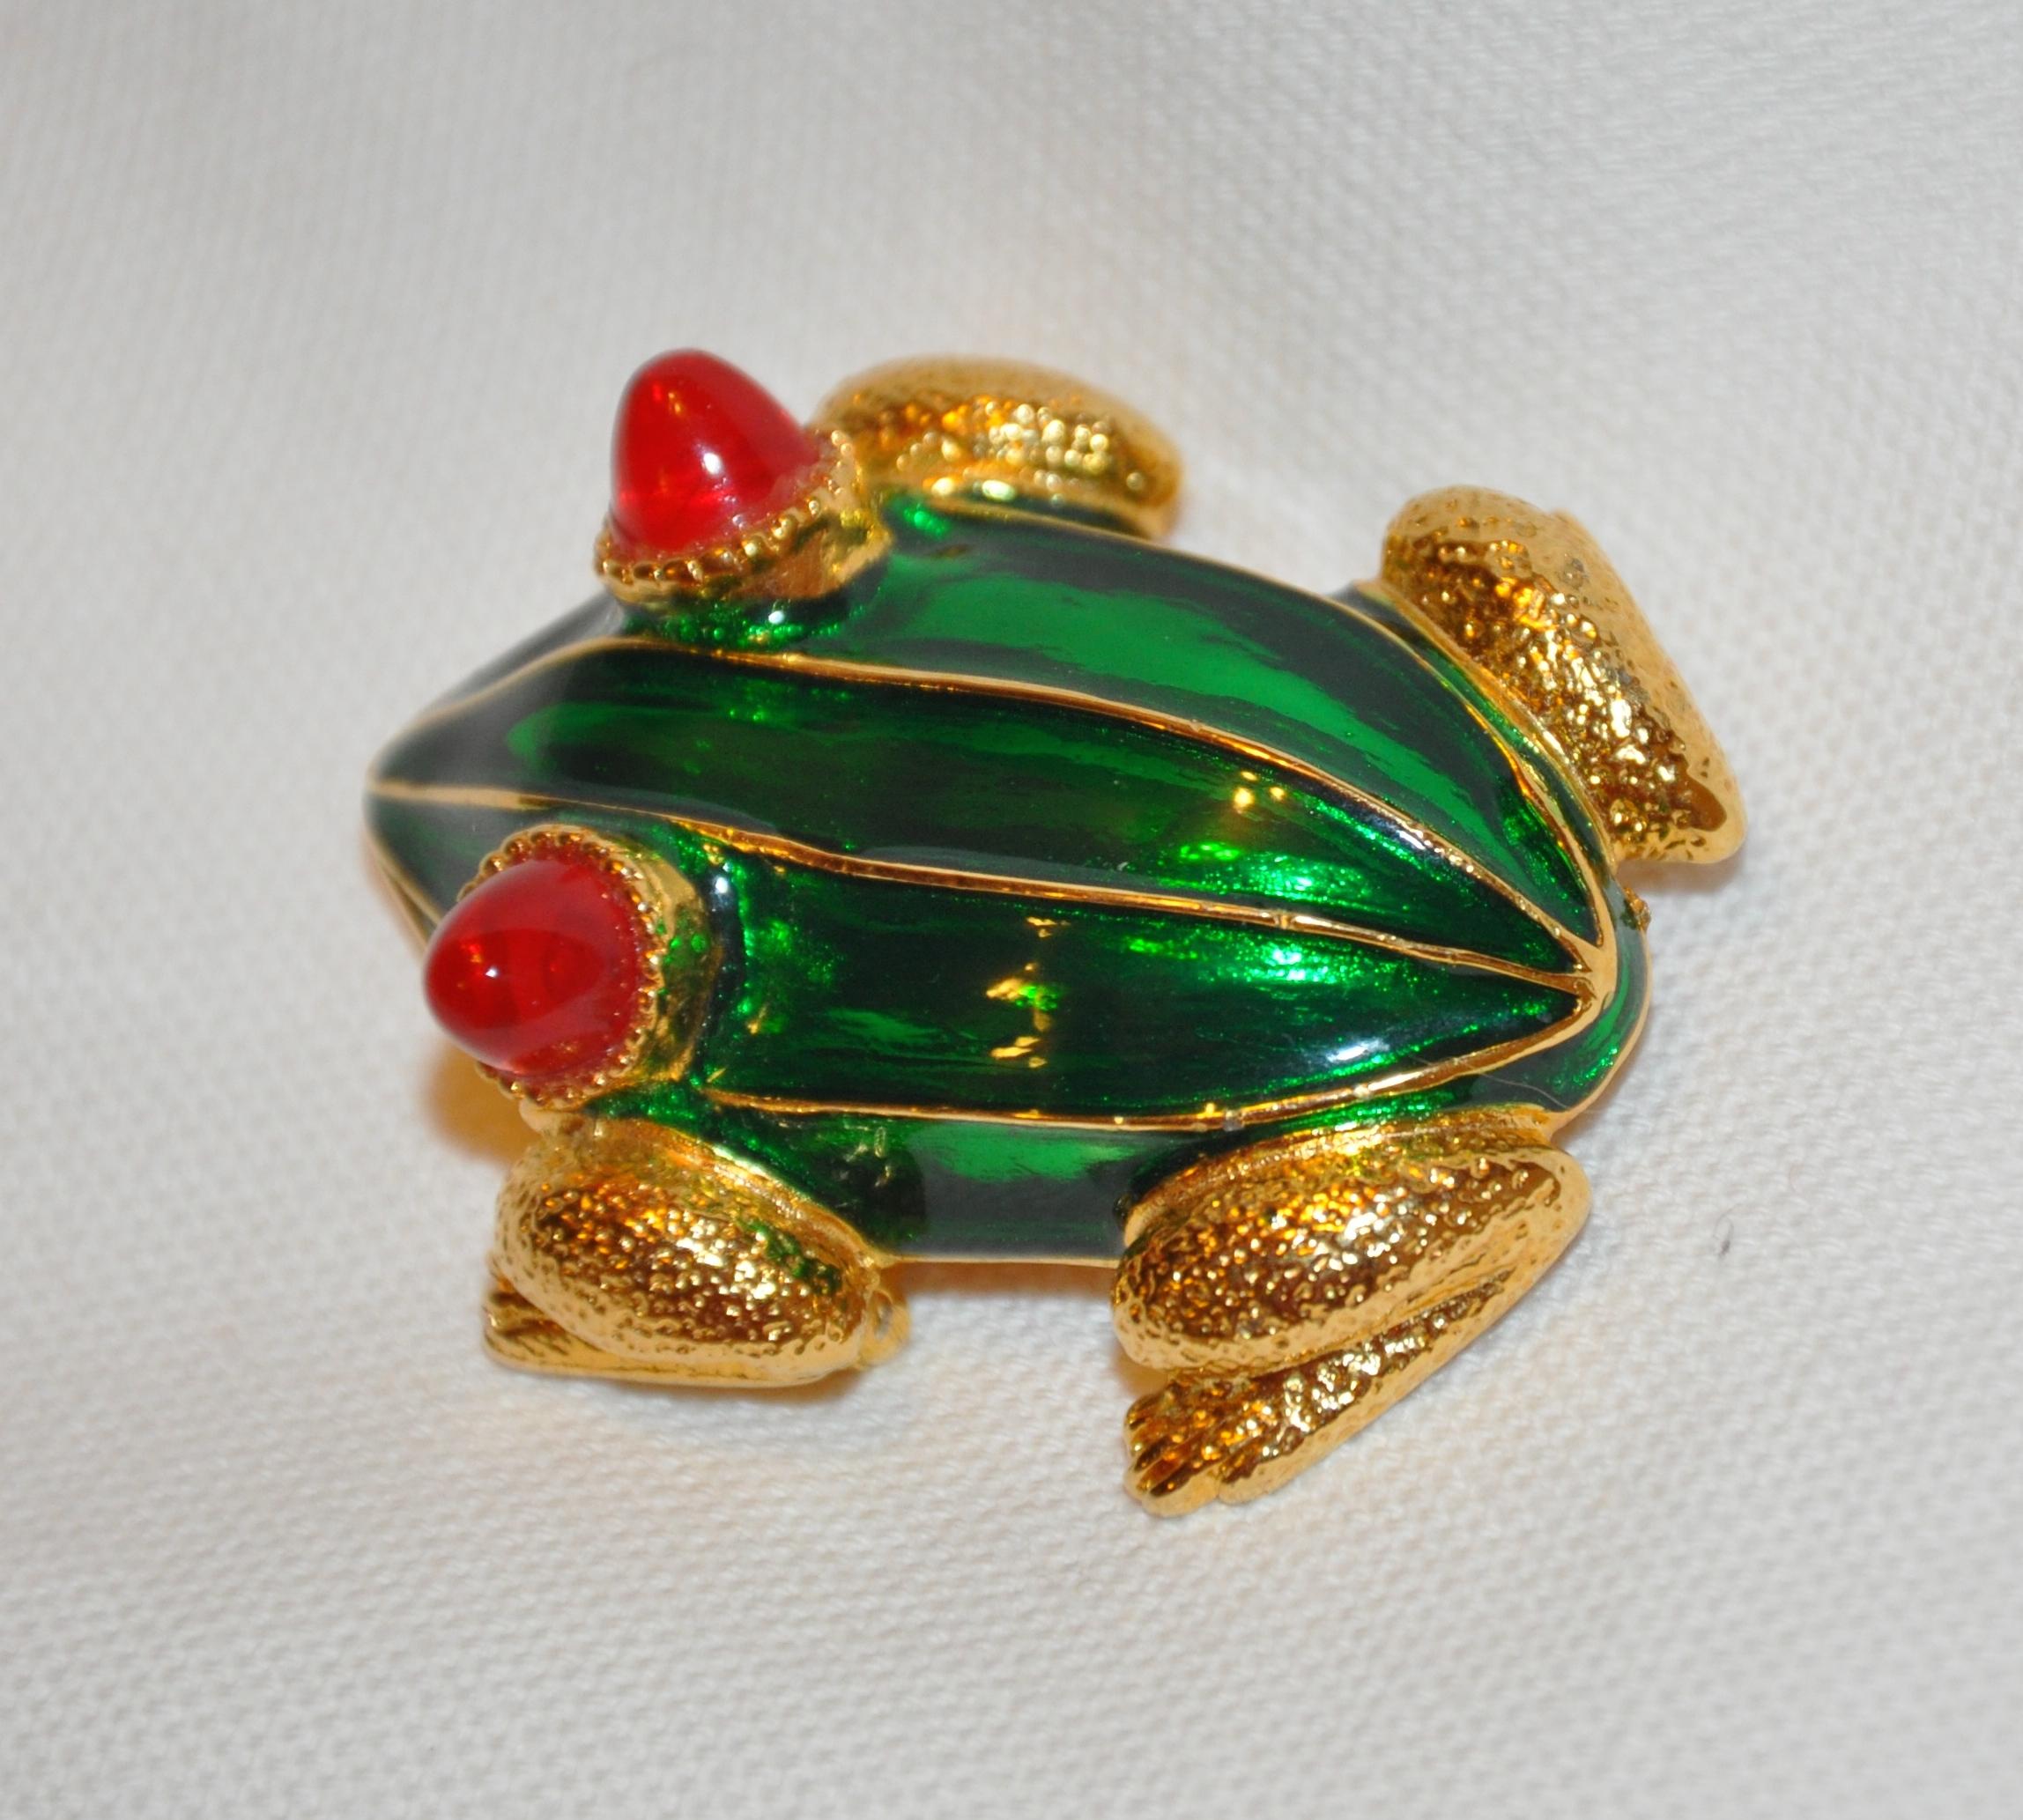 Kenneth Lane Rare Vivid Whimsical Green Enamel with Red Accent 